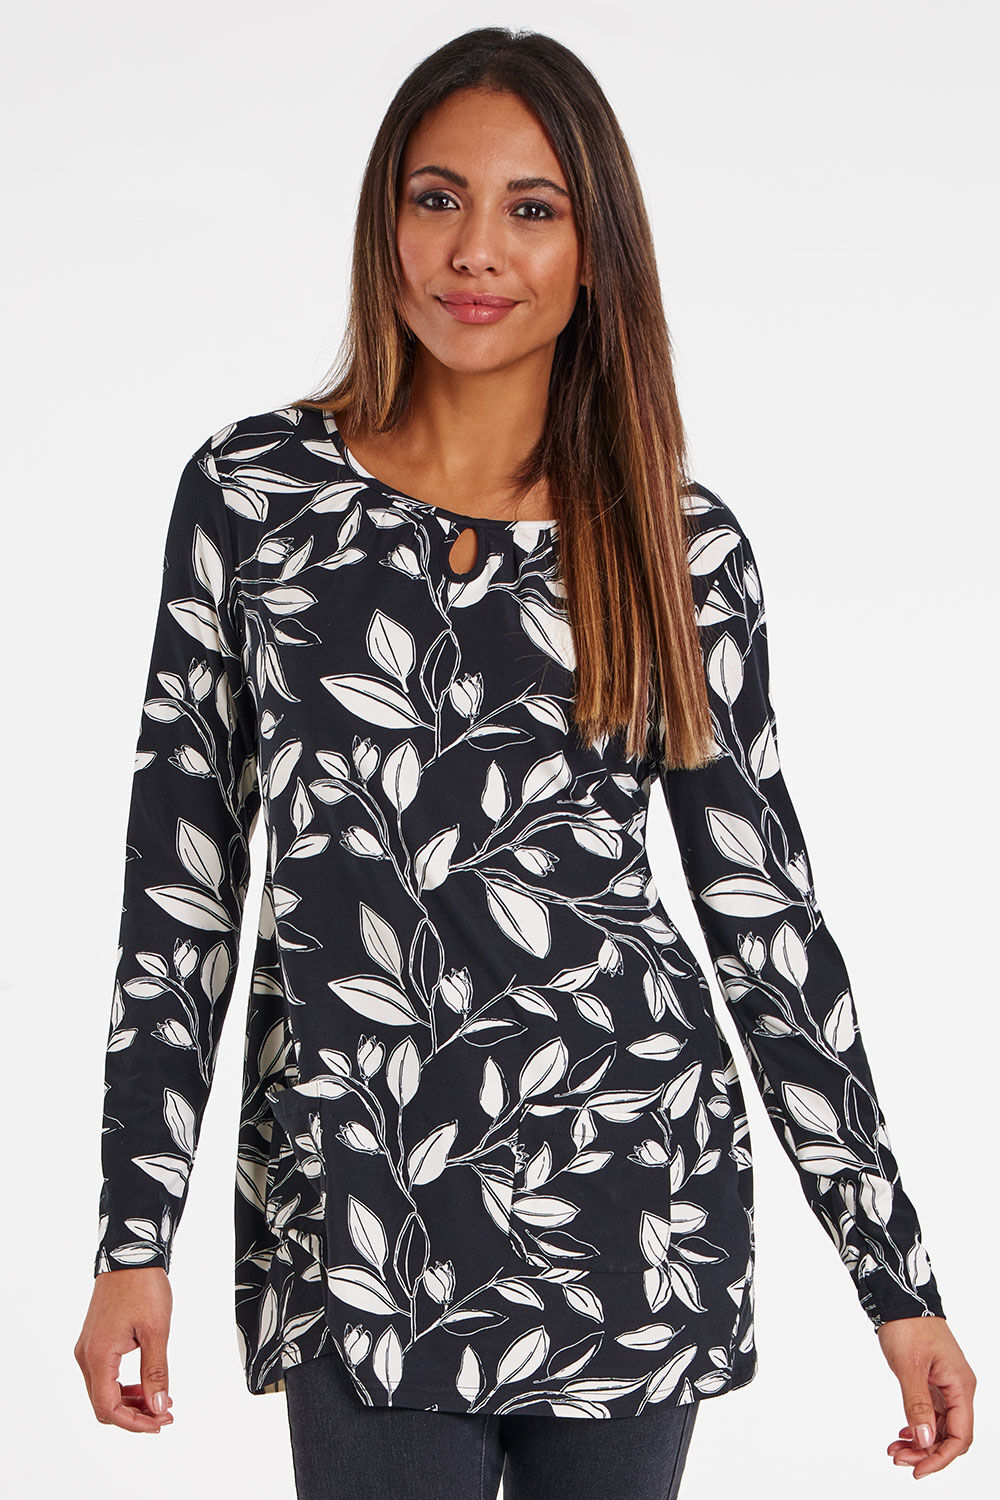 Bonmarche Black Long Sleeve Leaf Print Tunic With Pockets, Size: 10